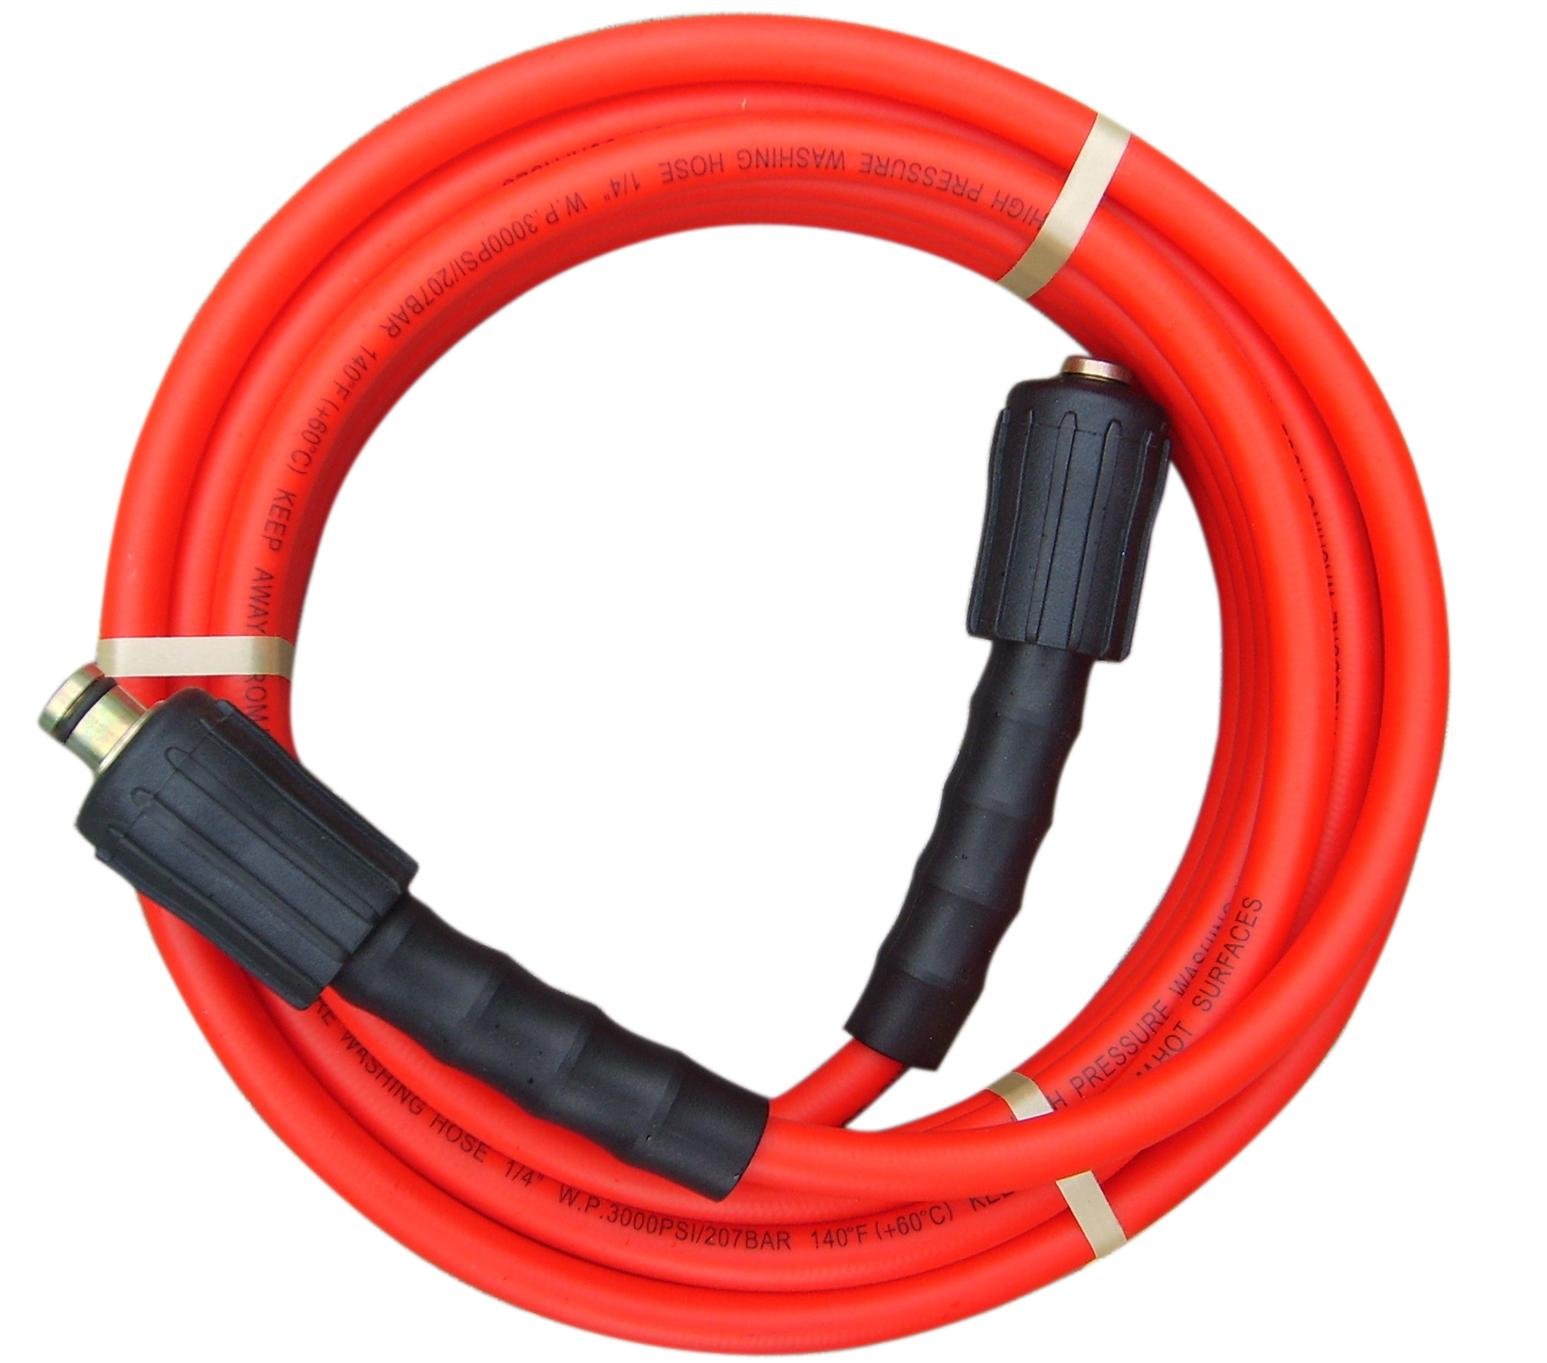 Black high pressure washing car equipment hose with quick connect fittings  2